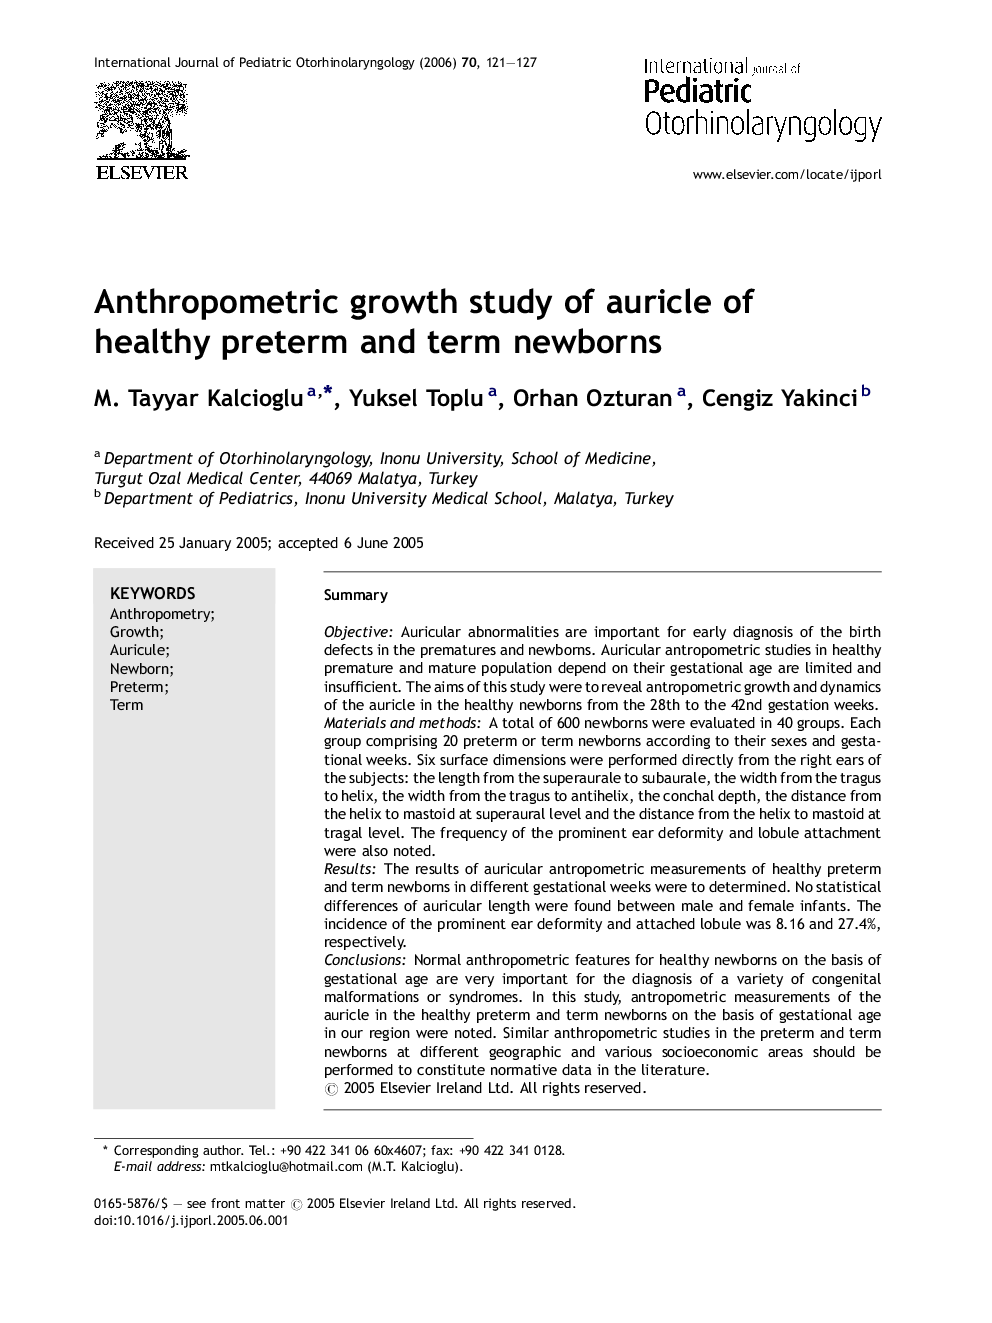 Anthropometric growth study of auricle of healthy preterm and term newborns